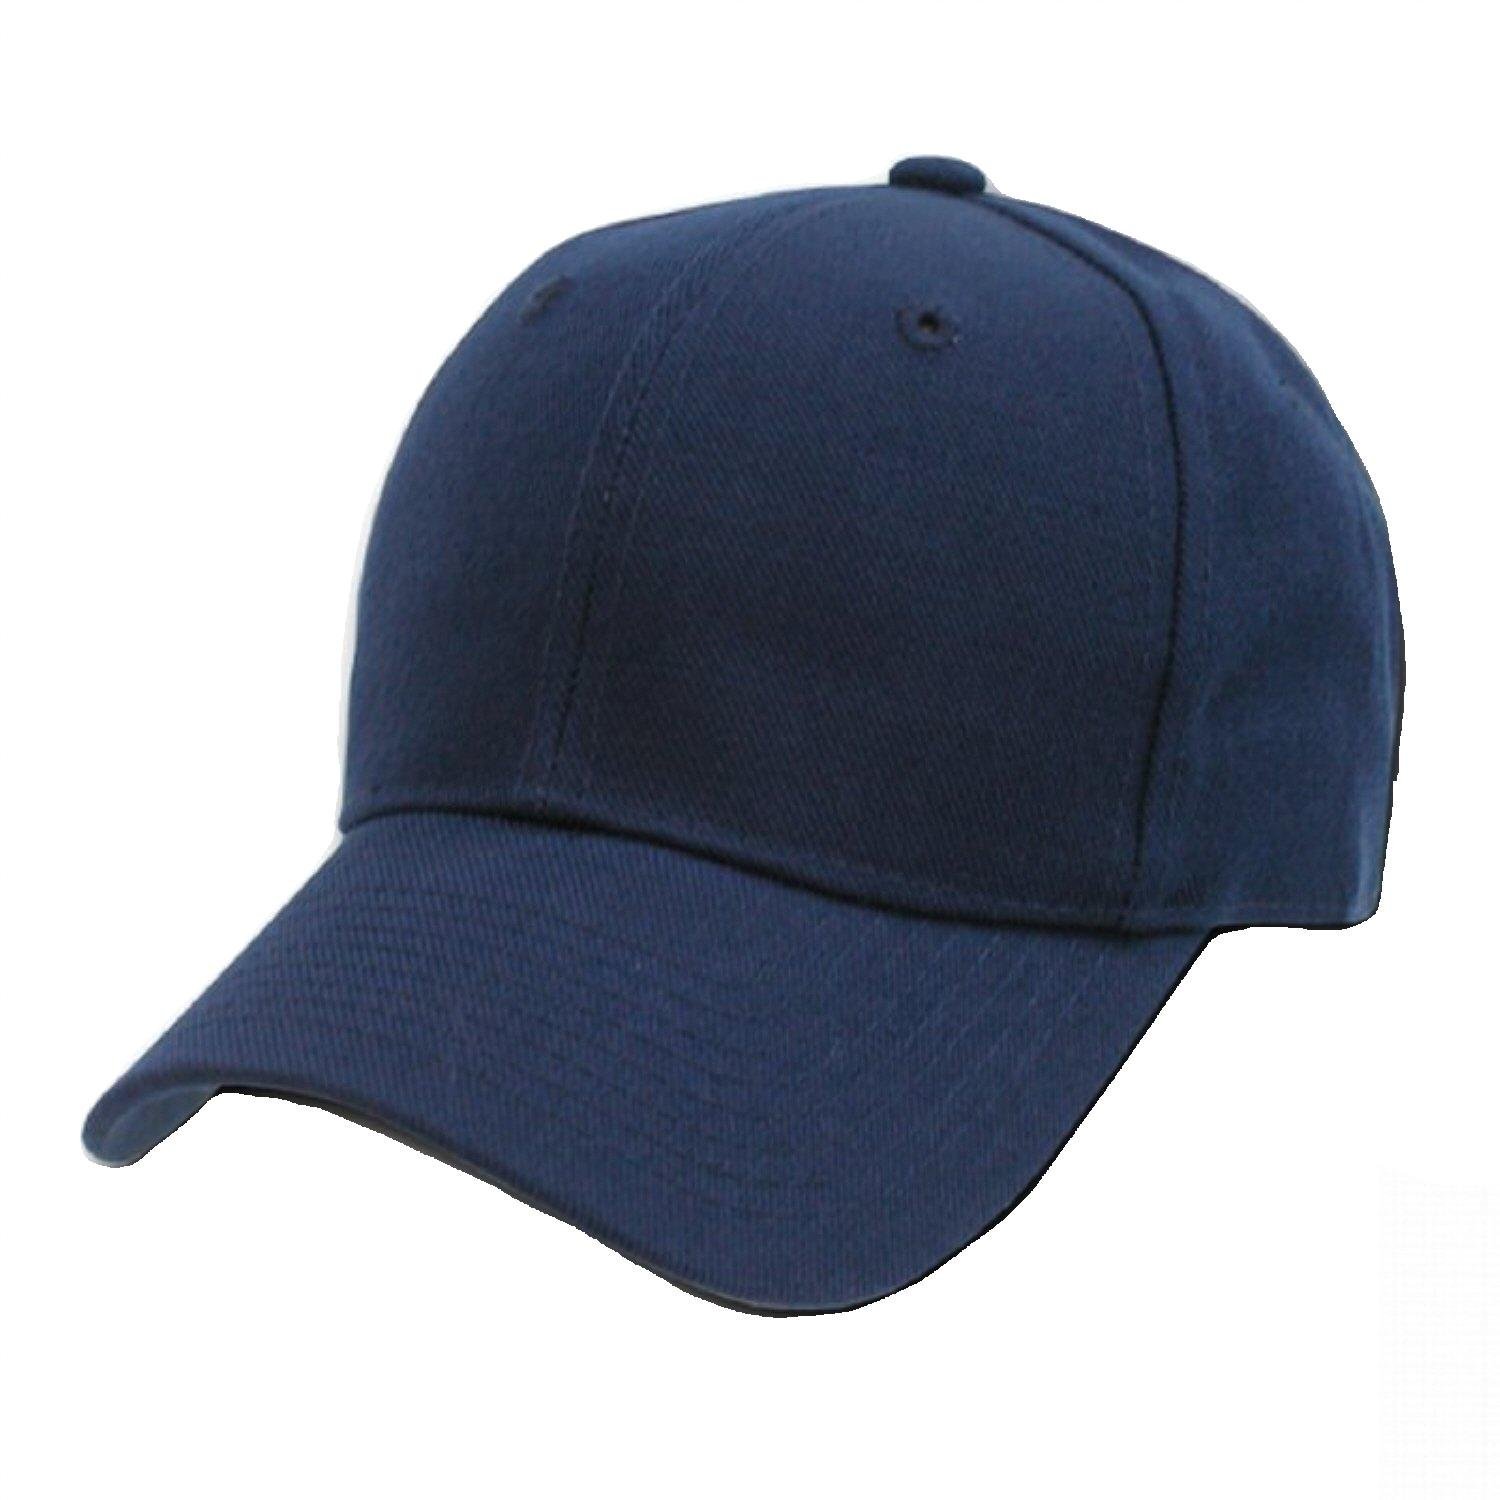 Decky Plain Solid Fitted Baseball Cap Navy Blue (Size 7 1/2) at ...